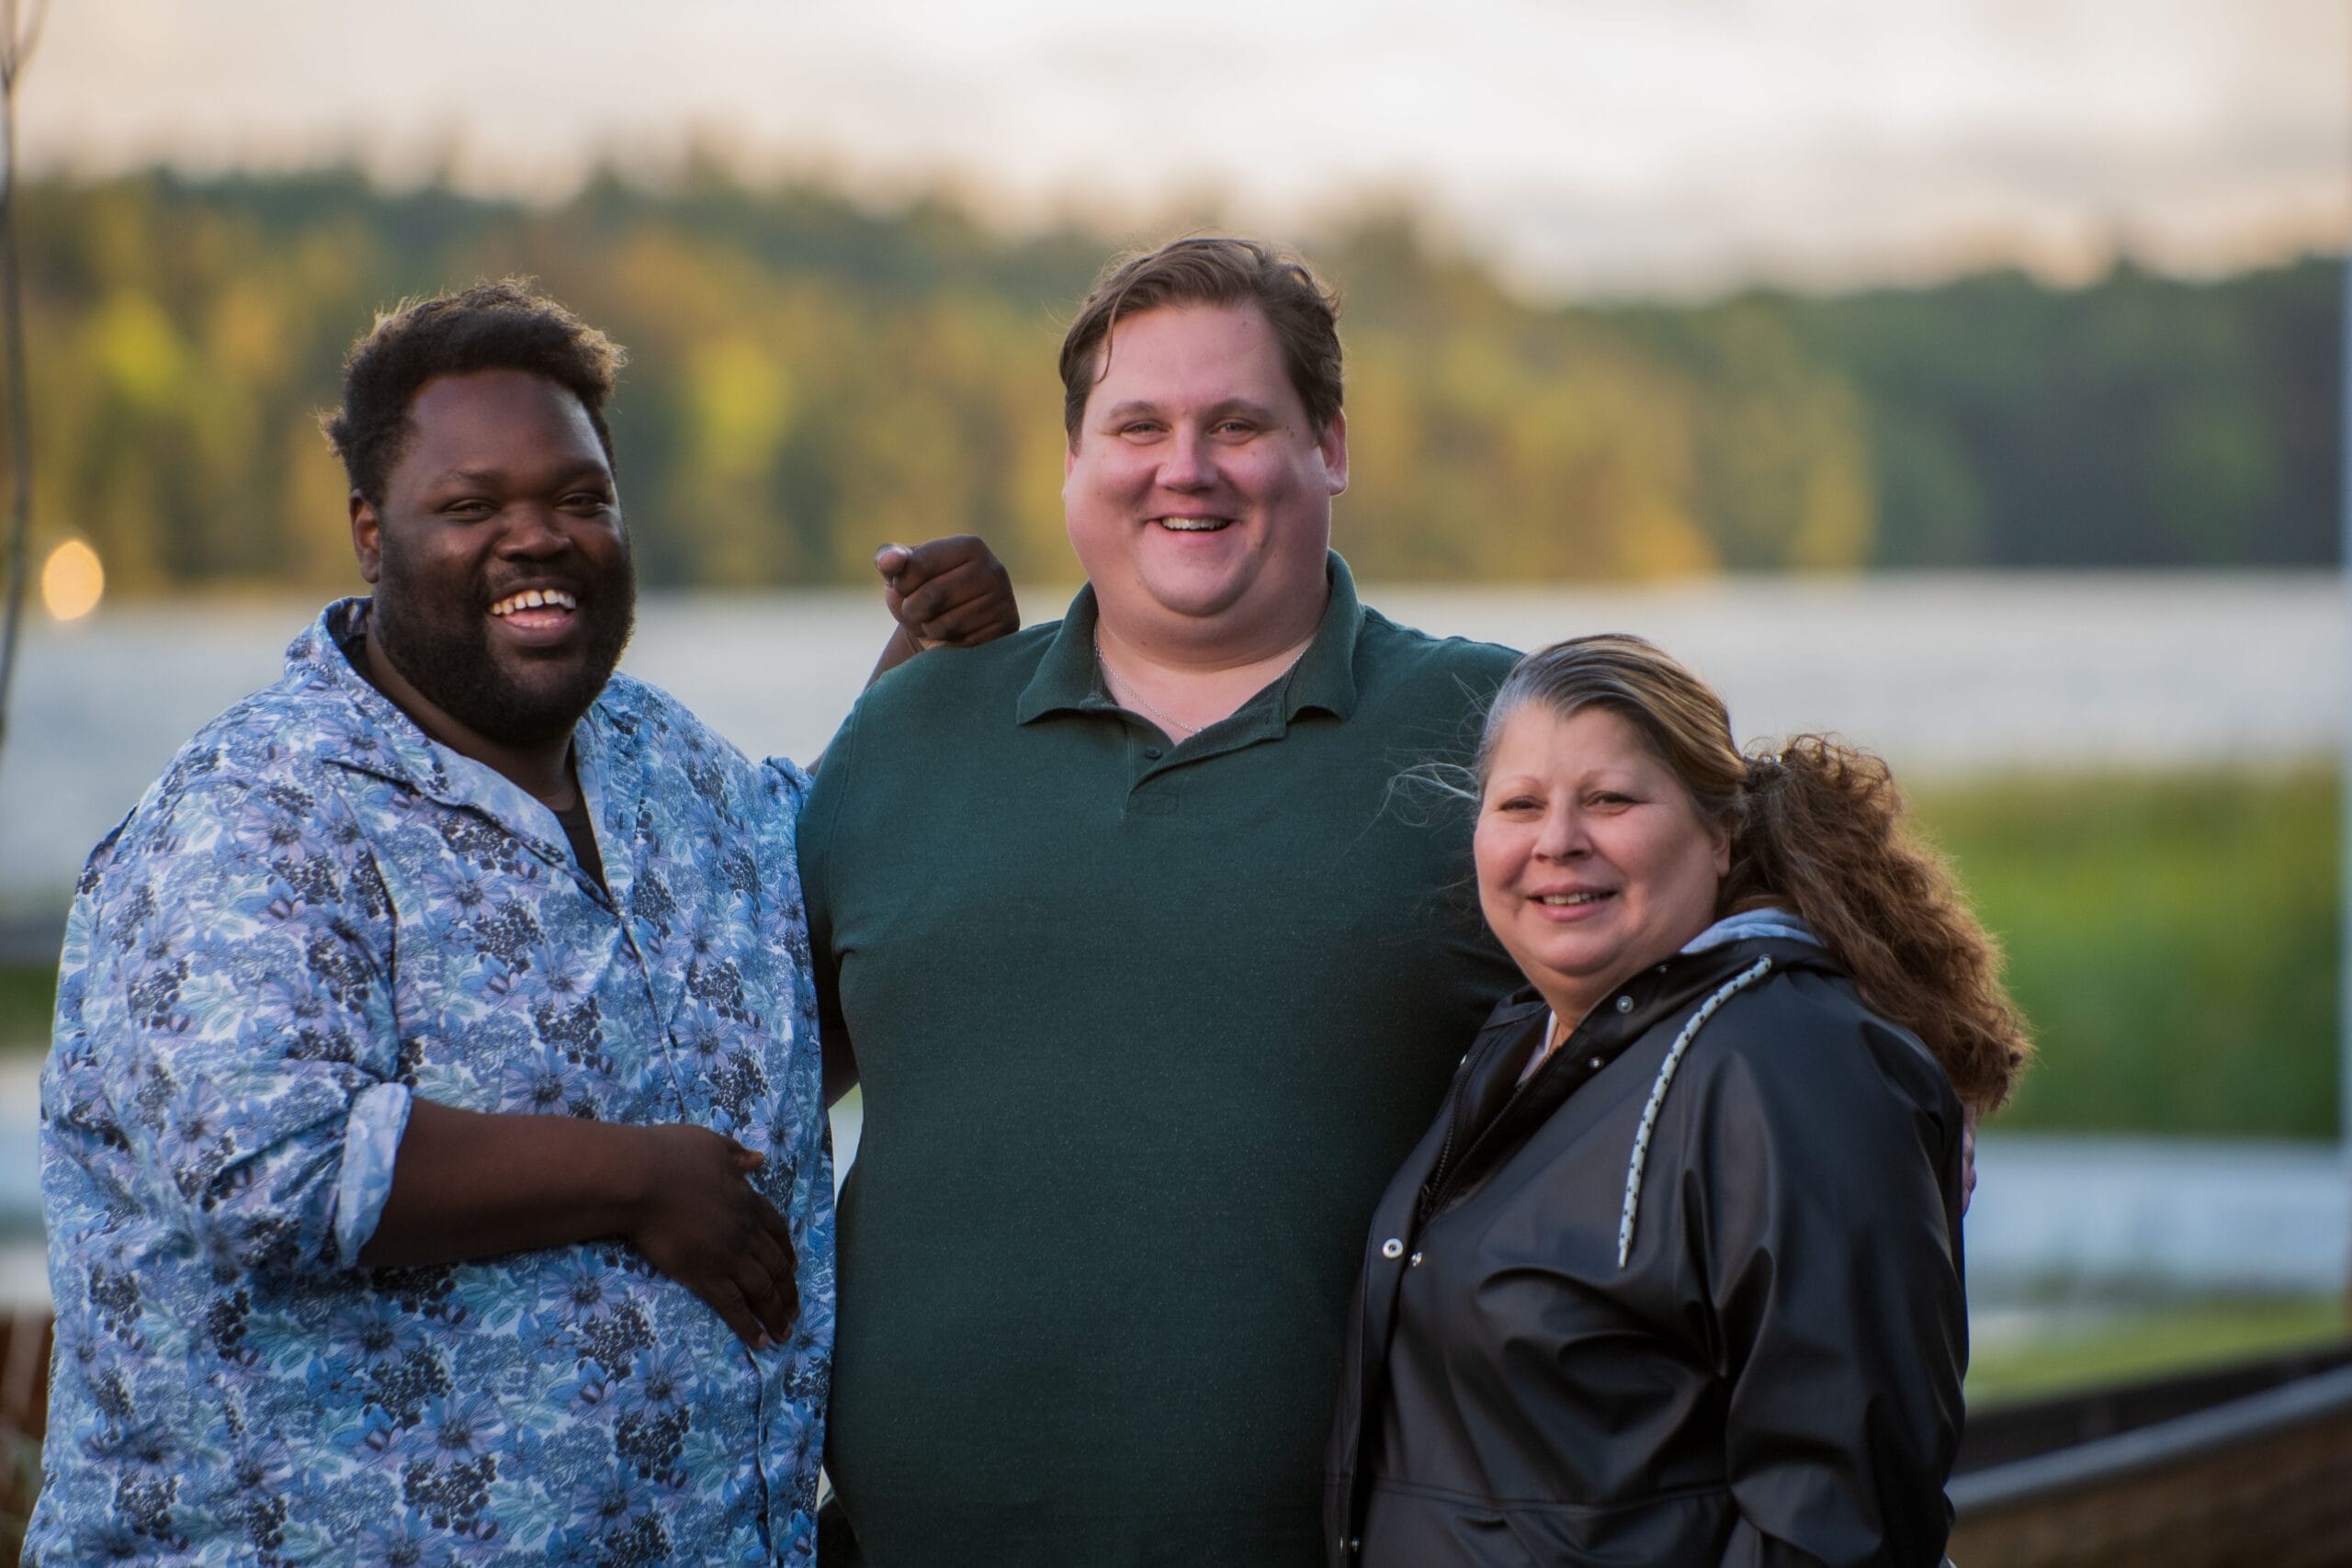 Three friends smiling together by a lake at sunset, with trees and water in the background. .